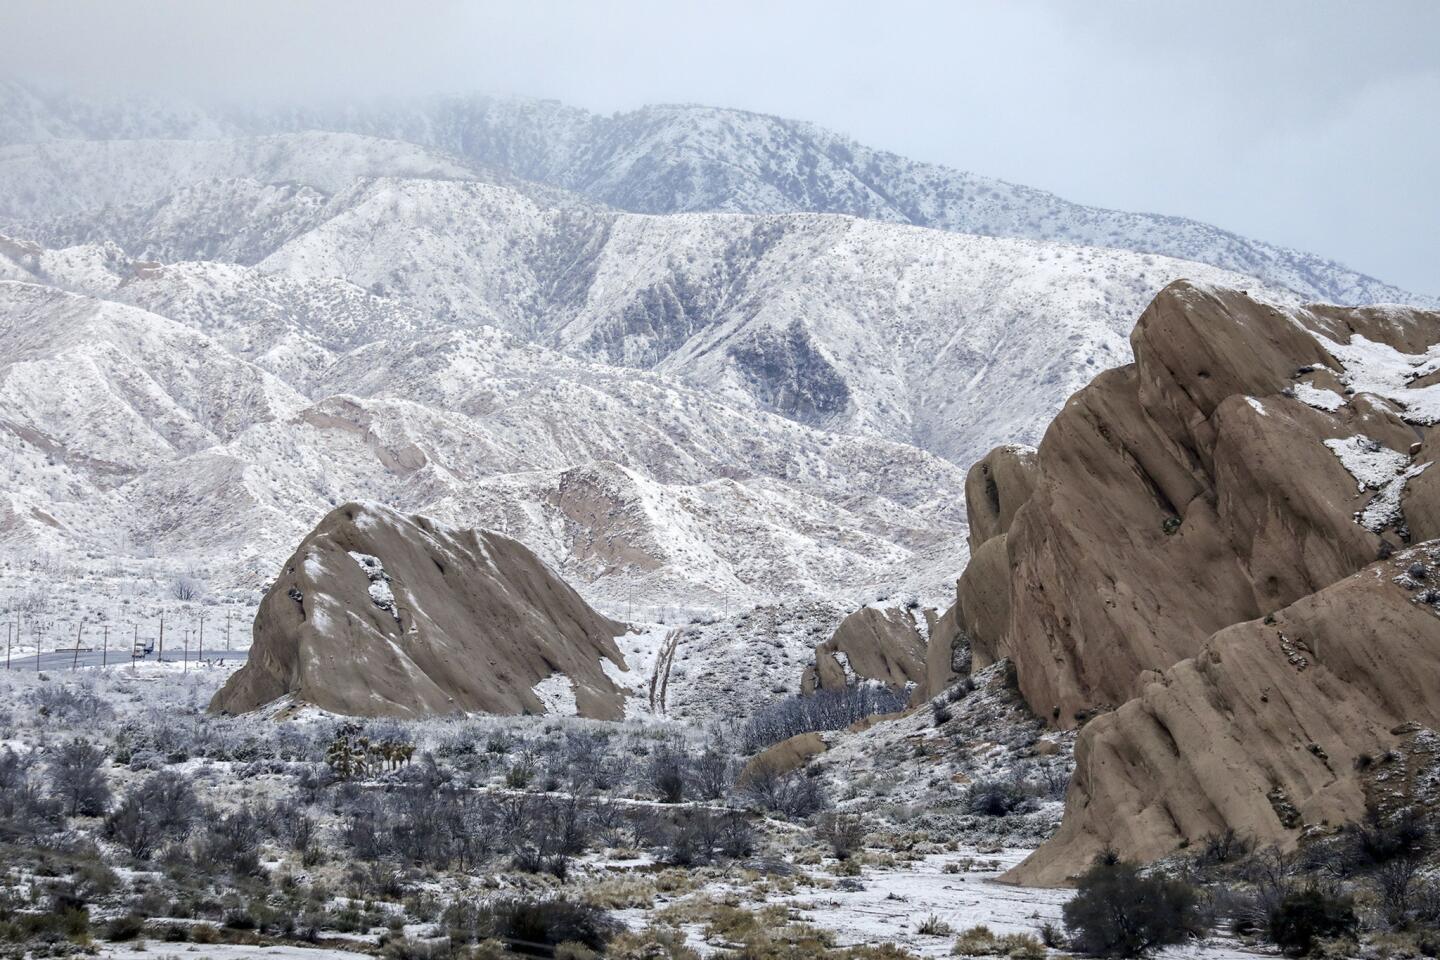 Snow level drops to low elevations around Southland